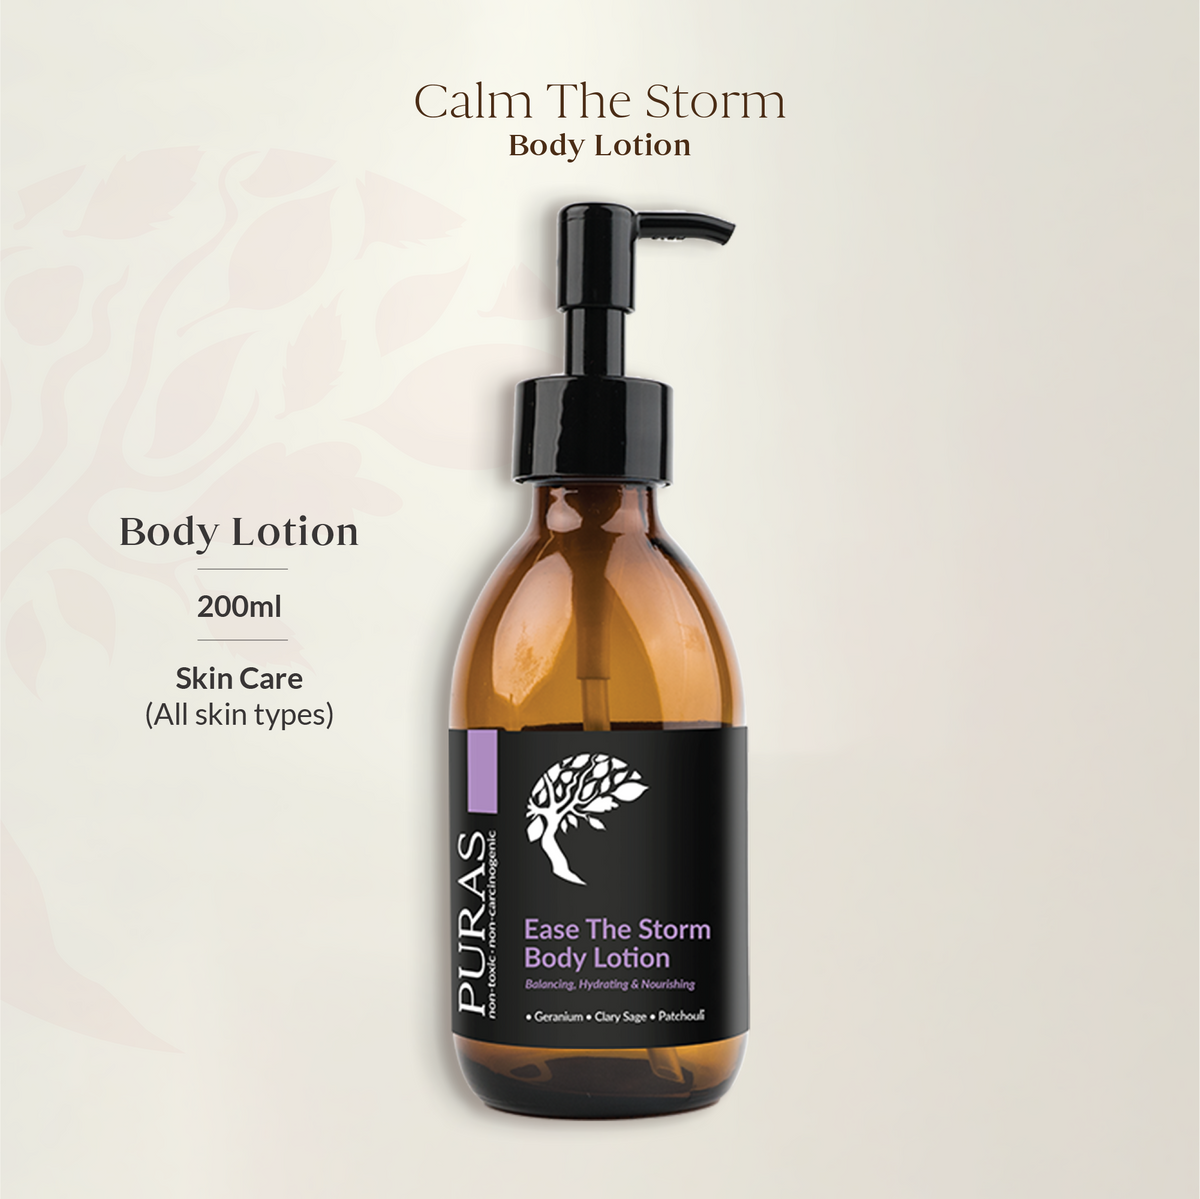 Ease The Storm Body Lotion 200ml